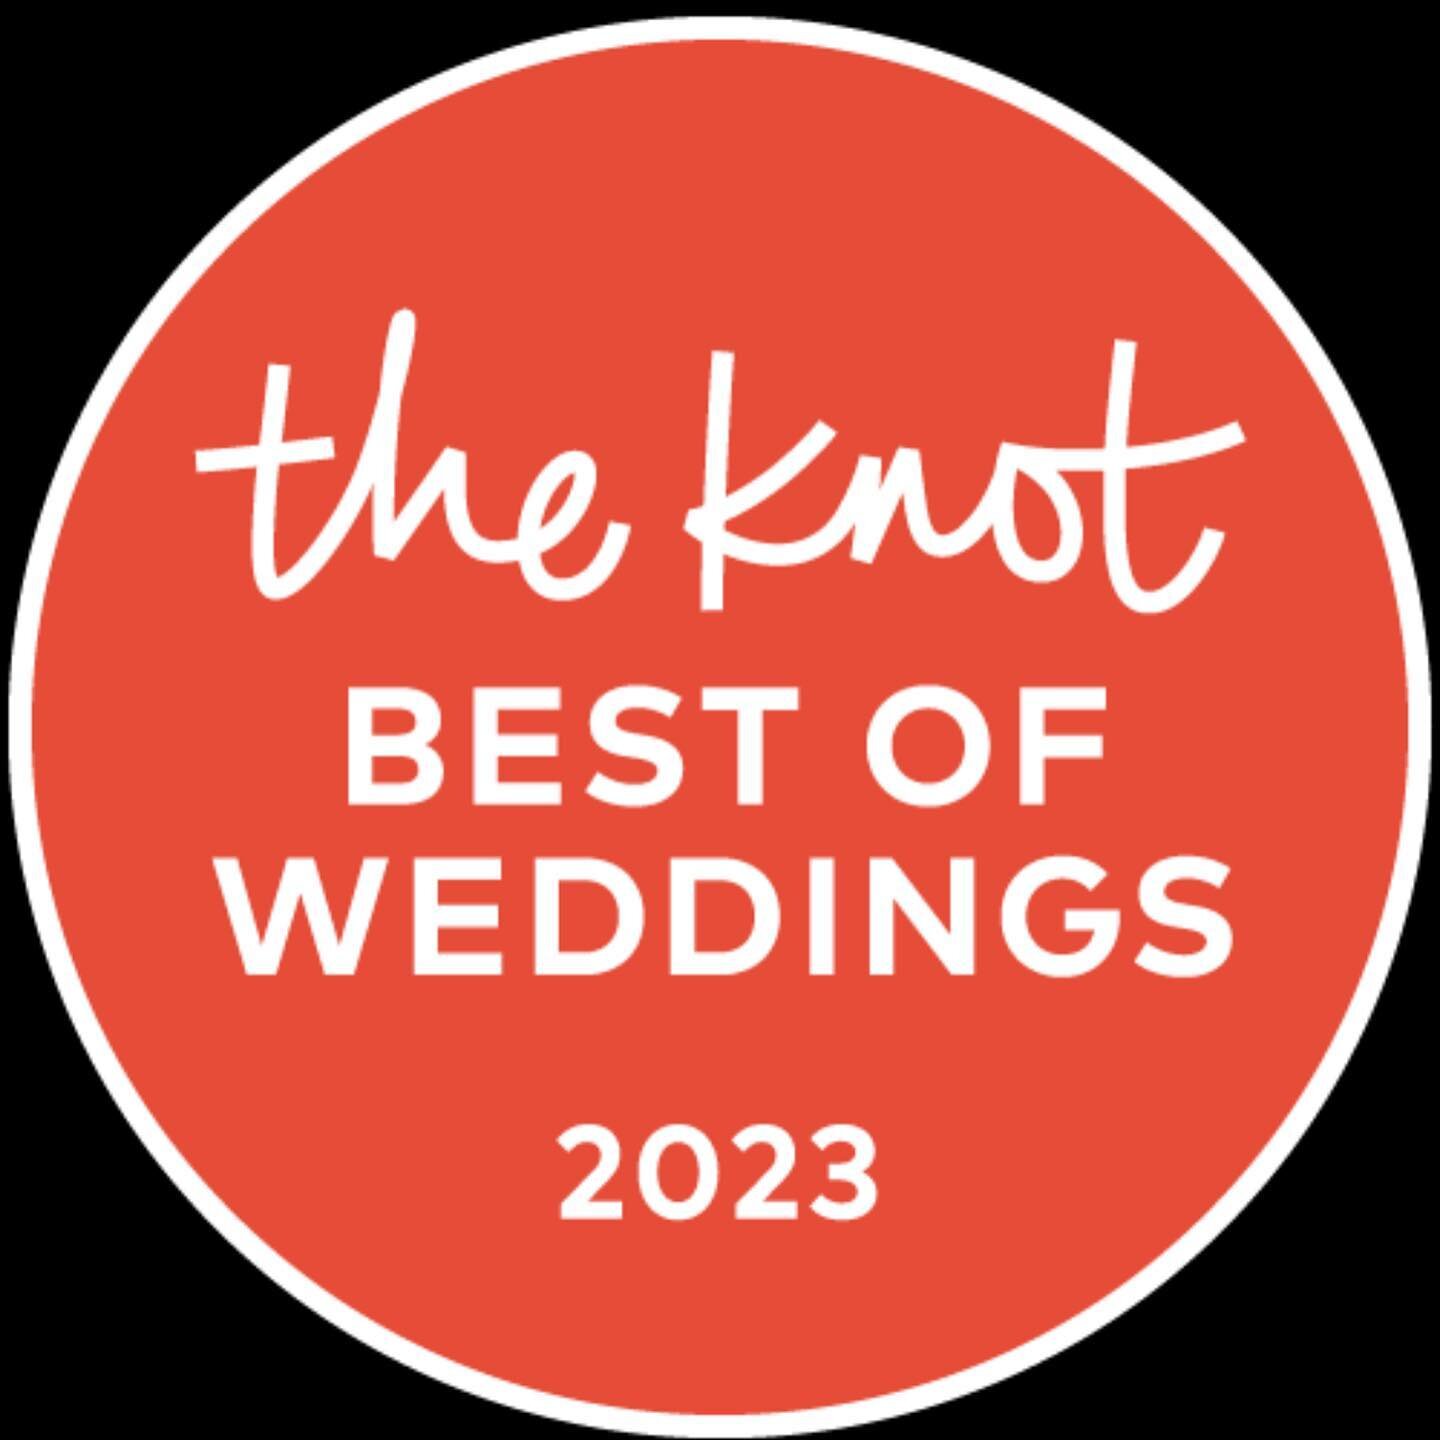 What an incredible honor and blessing to be chosen another year for The Knot&rsquo;s Best of Weddings and for the first time WeddingPros Couple Choice Award!!!!!!

To all our treasured couples, clients, vendors, supporters and friends we are so grate